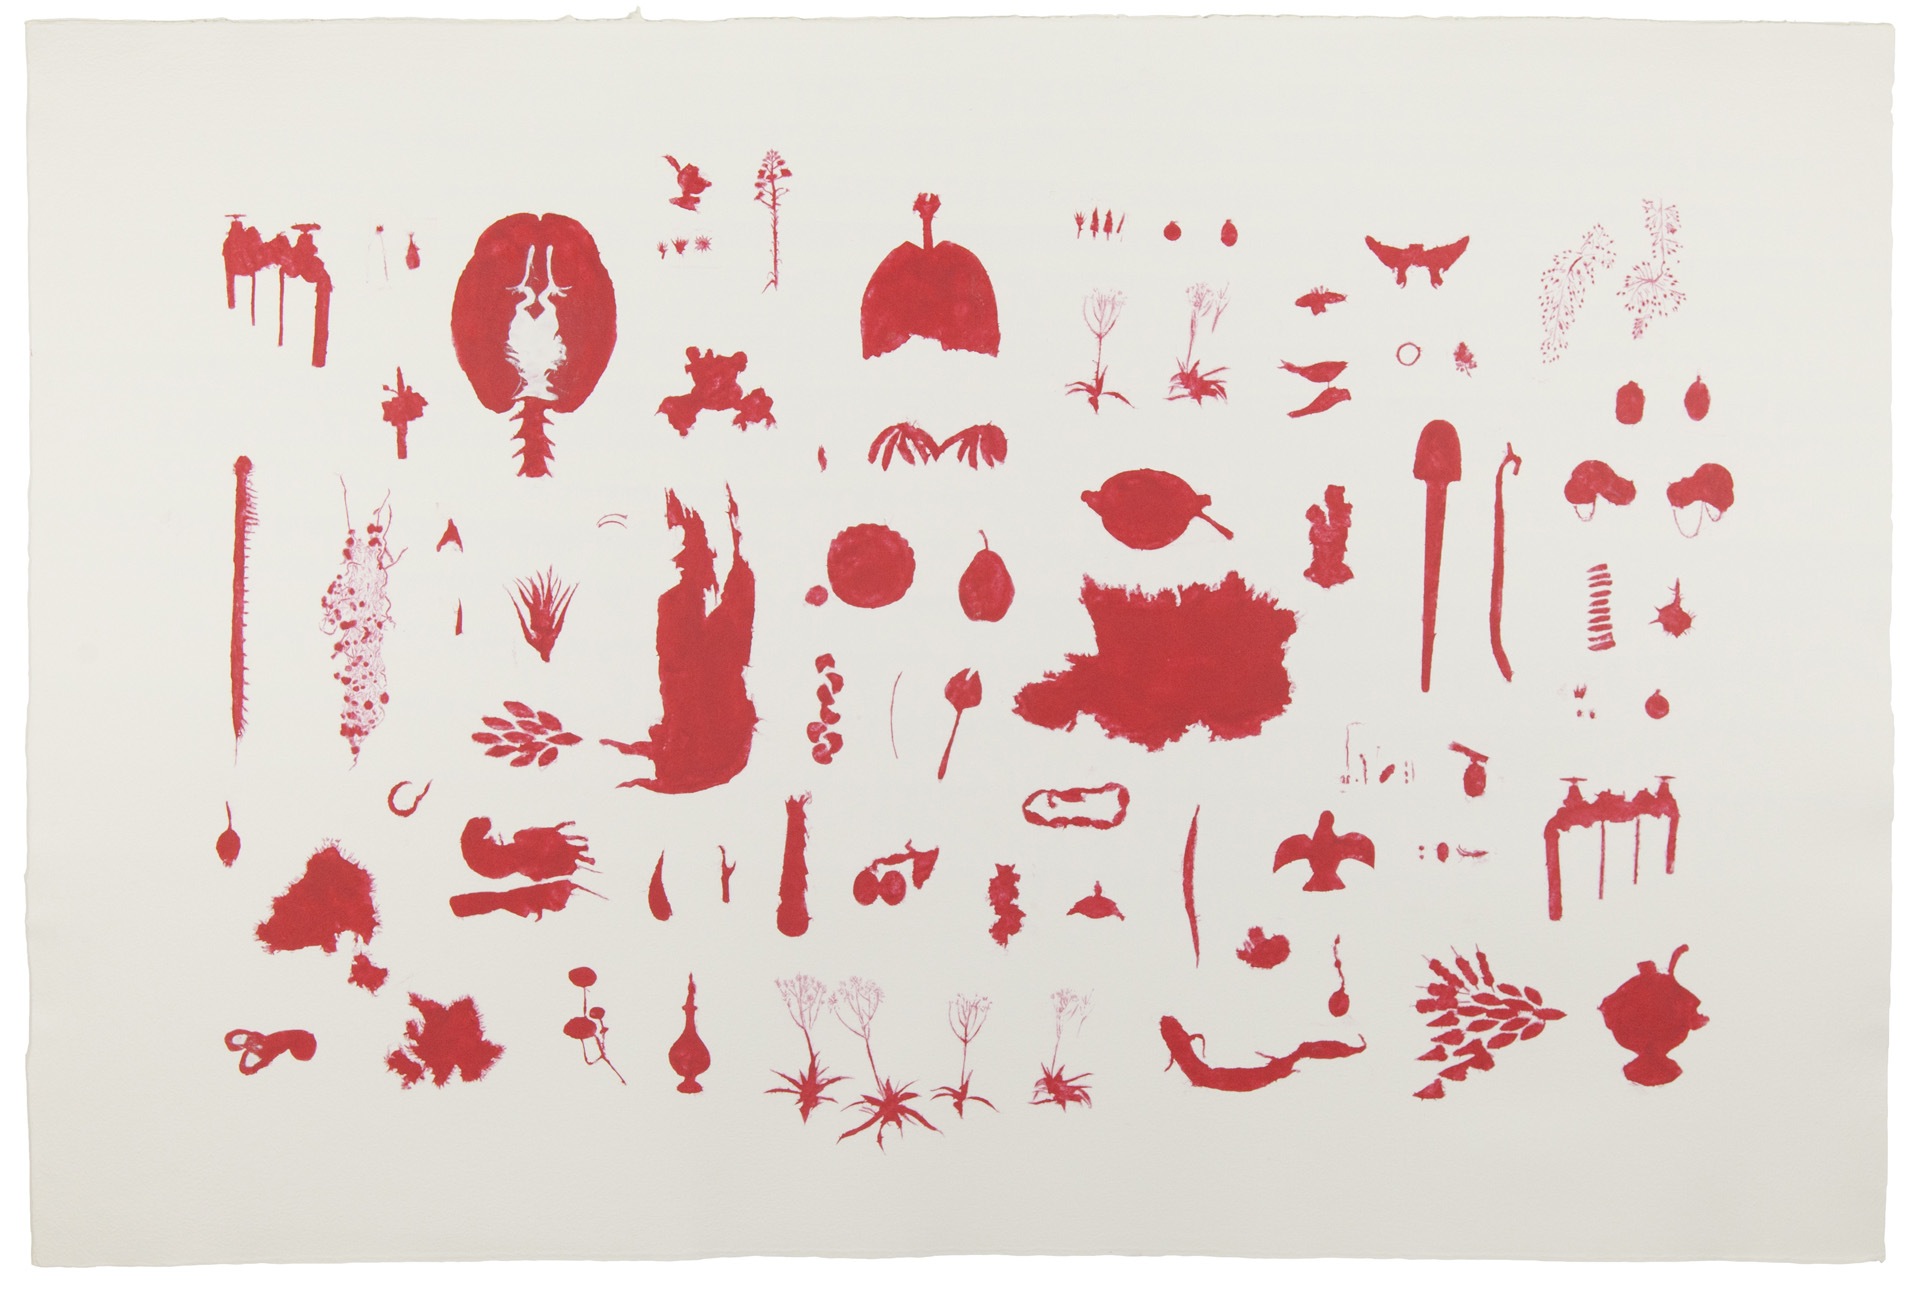   Guide , 2014, stenciled pigmented linen pulp on cotton paper, 40” x 60” 